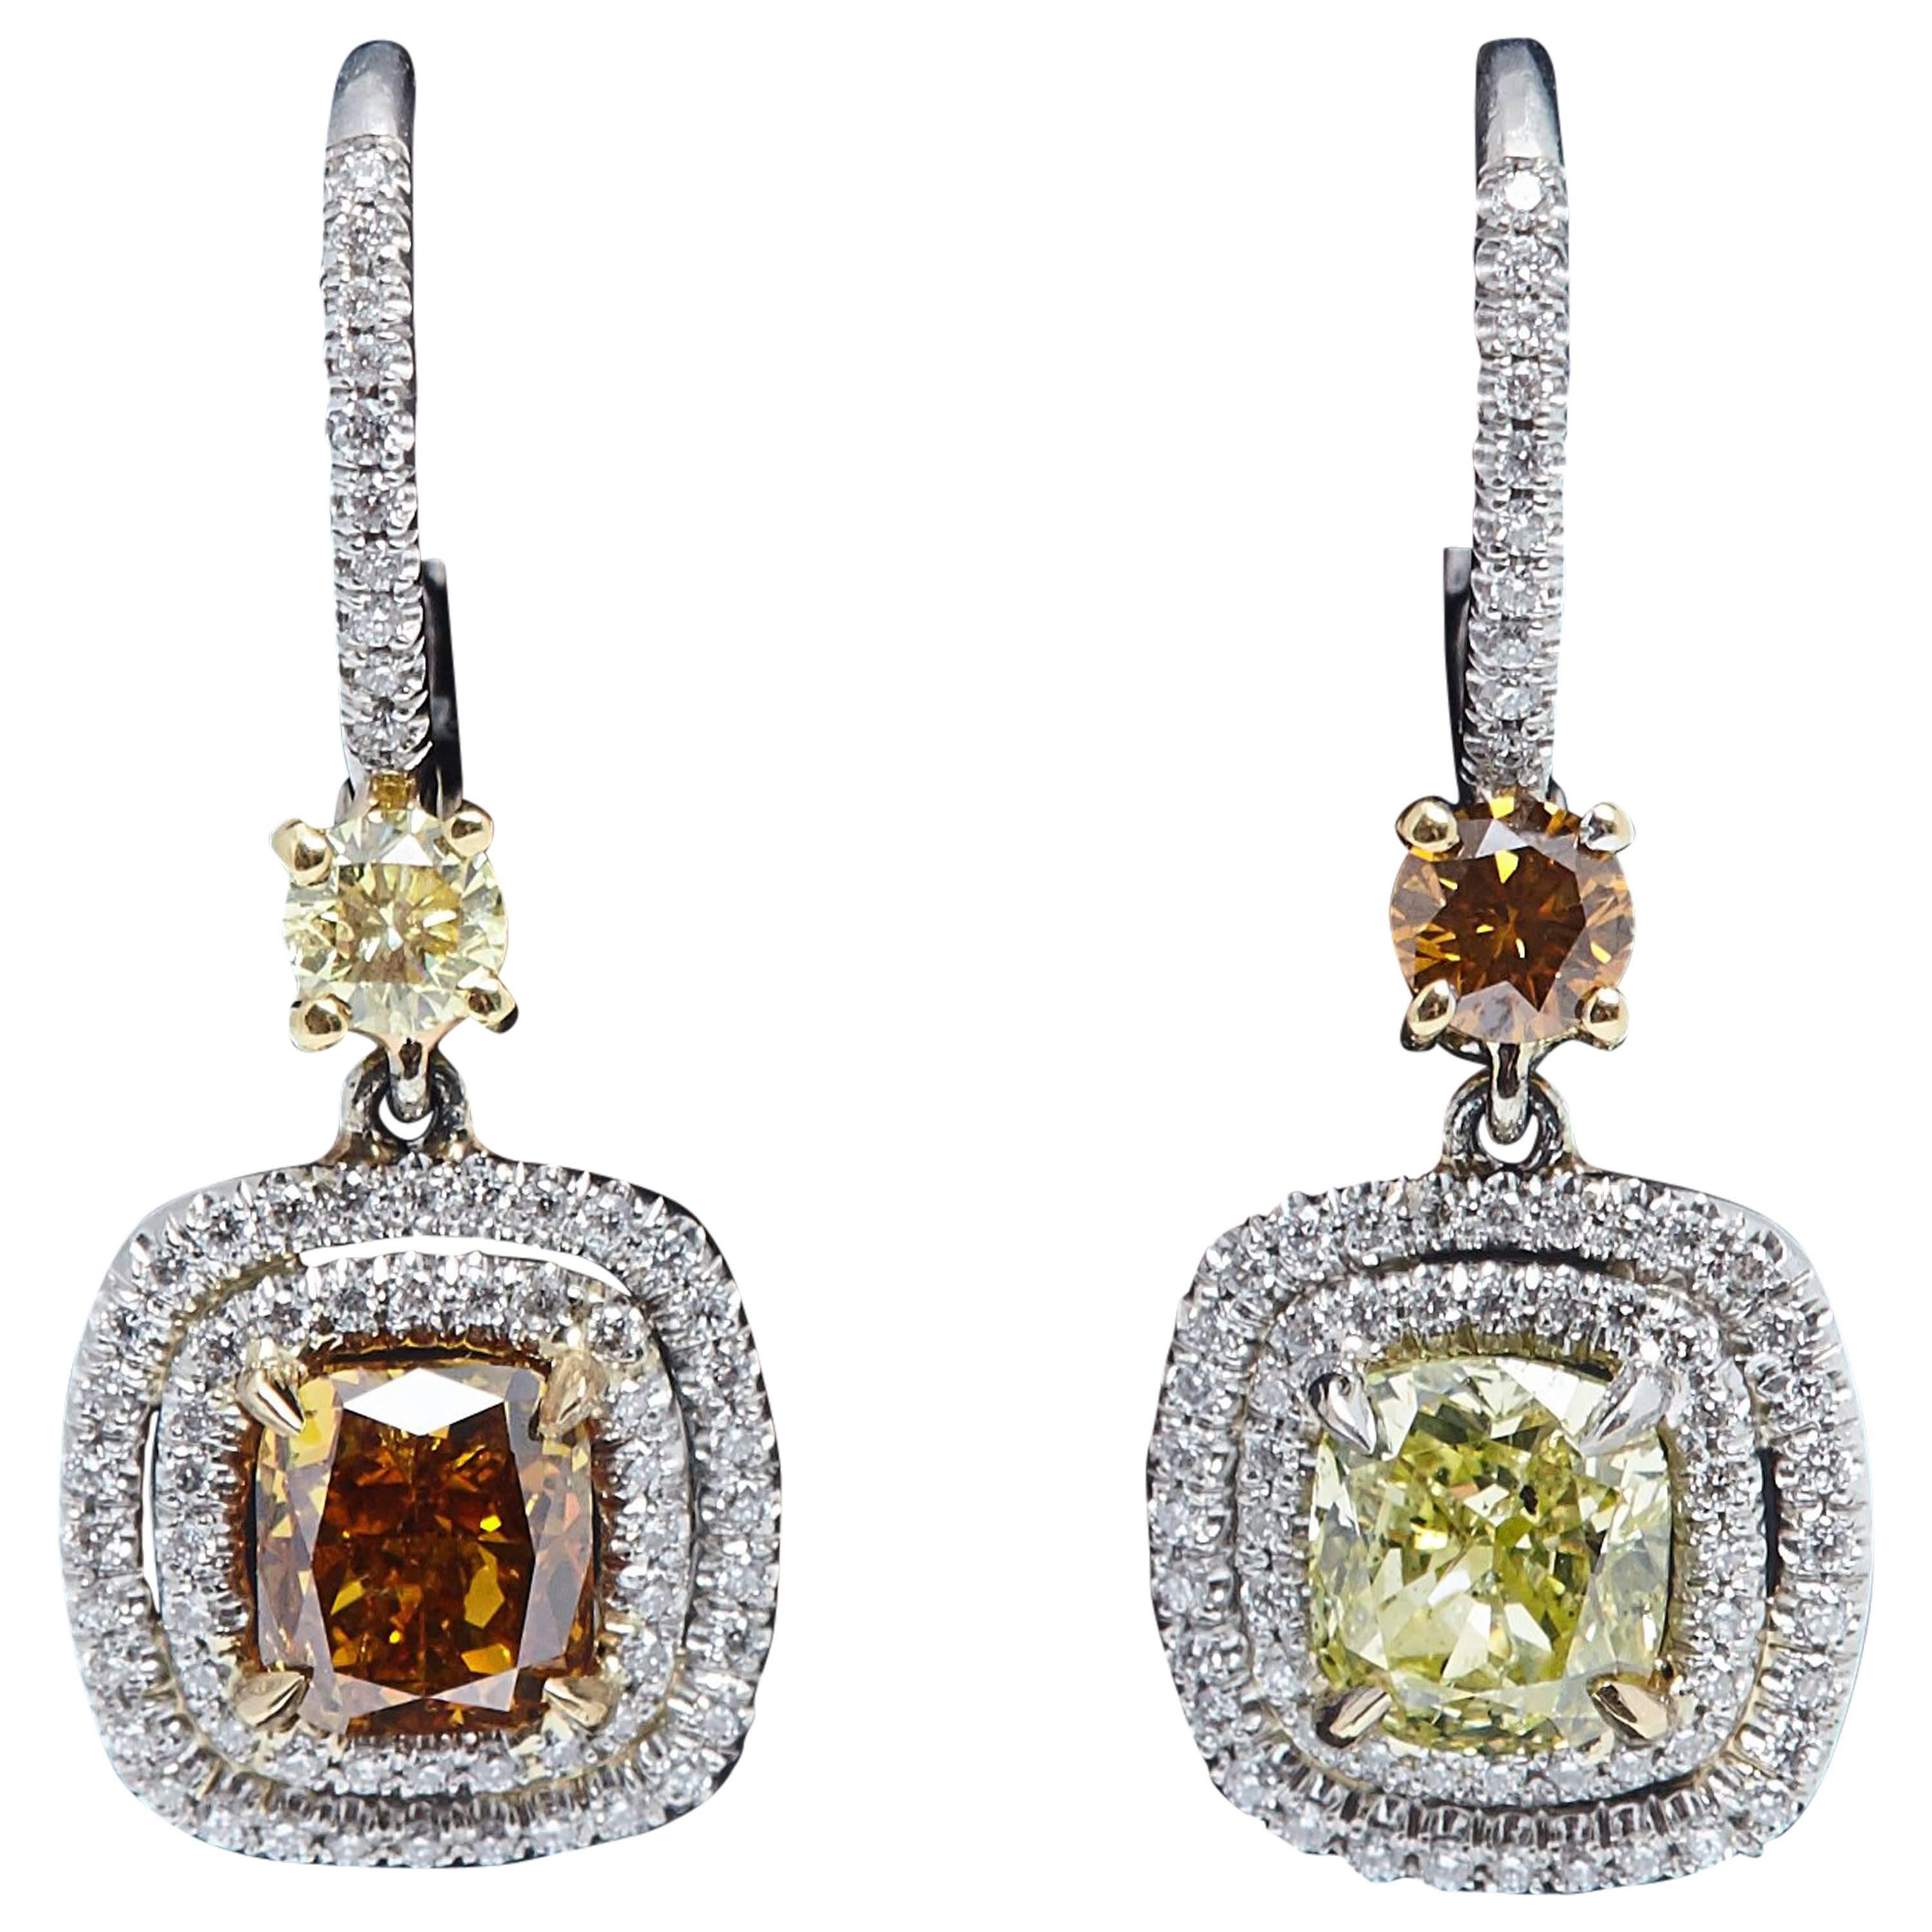 Exquisite Fancy Colored Cushion Shaped Diamonds GIA Dangling Halo Earrings For Sale